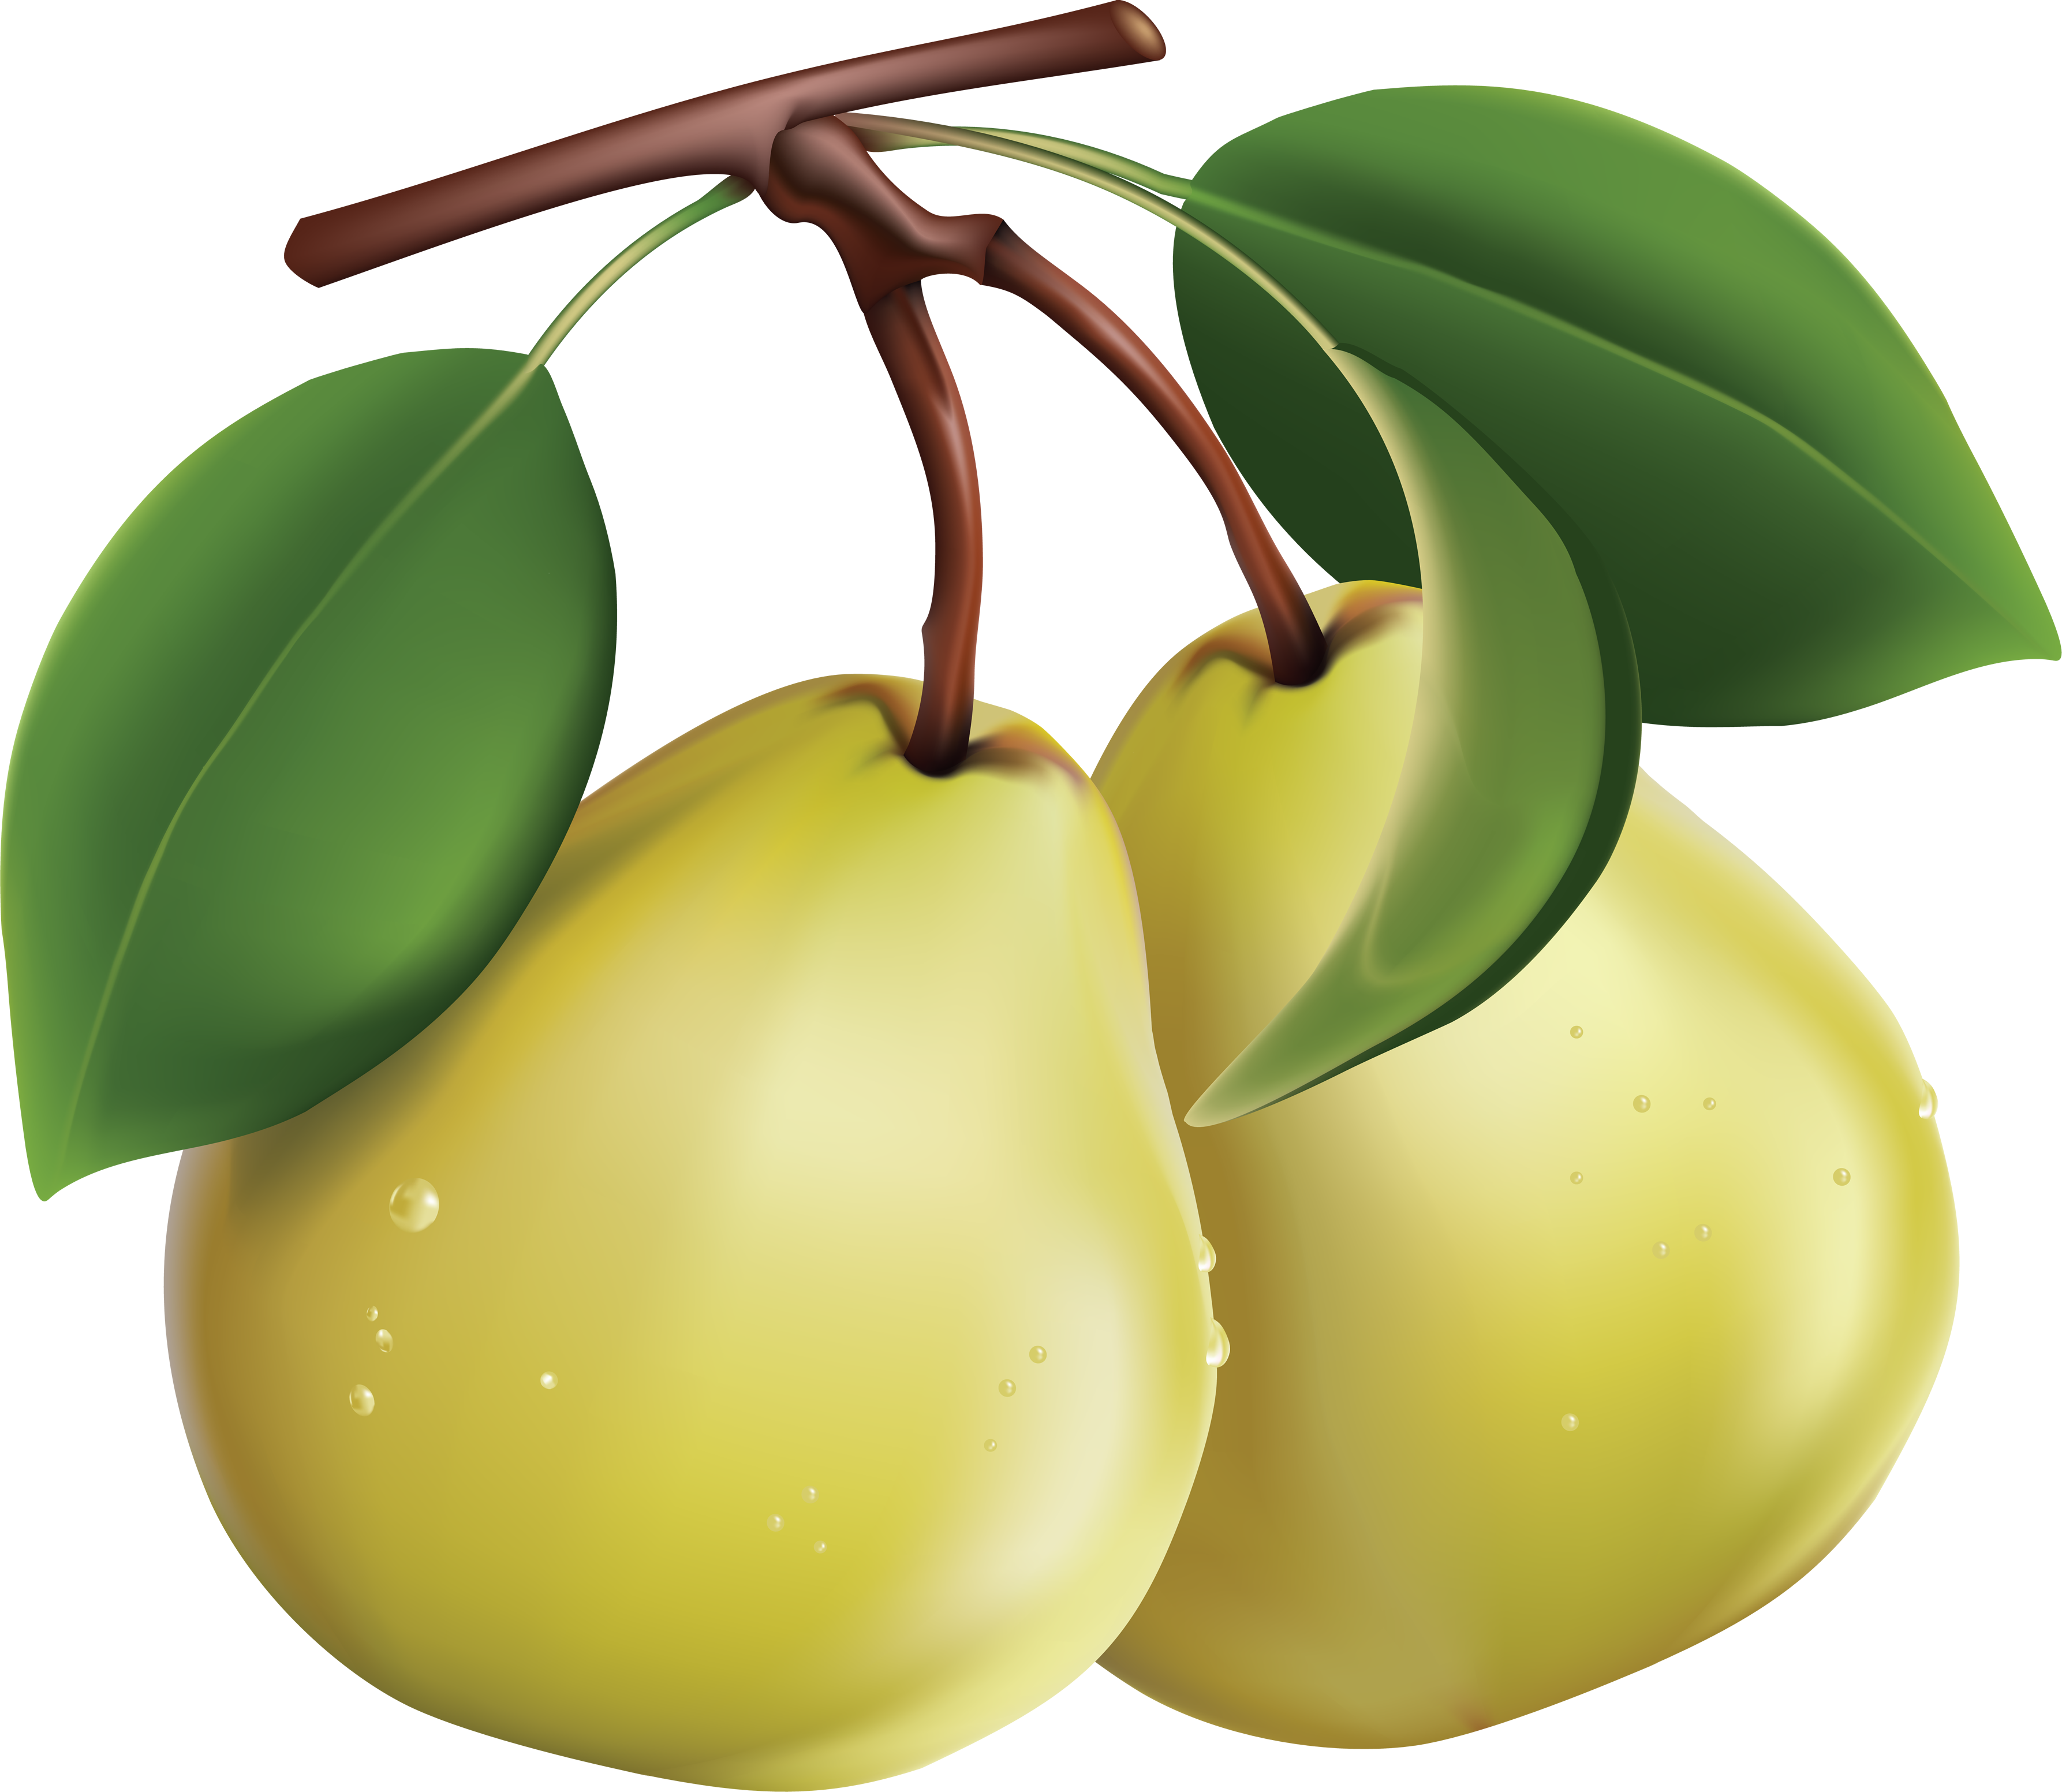 Fresh Green Pears Free Download Image PNG Image